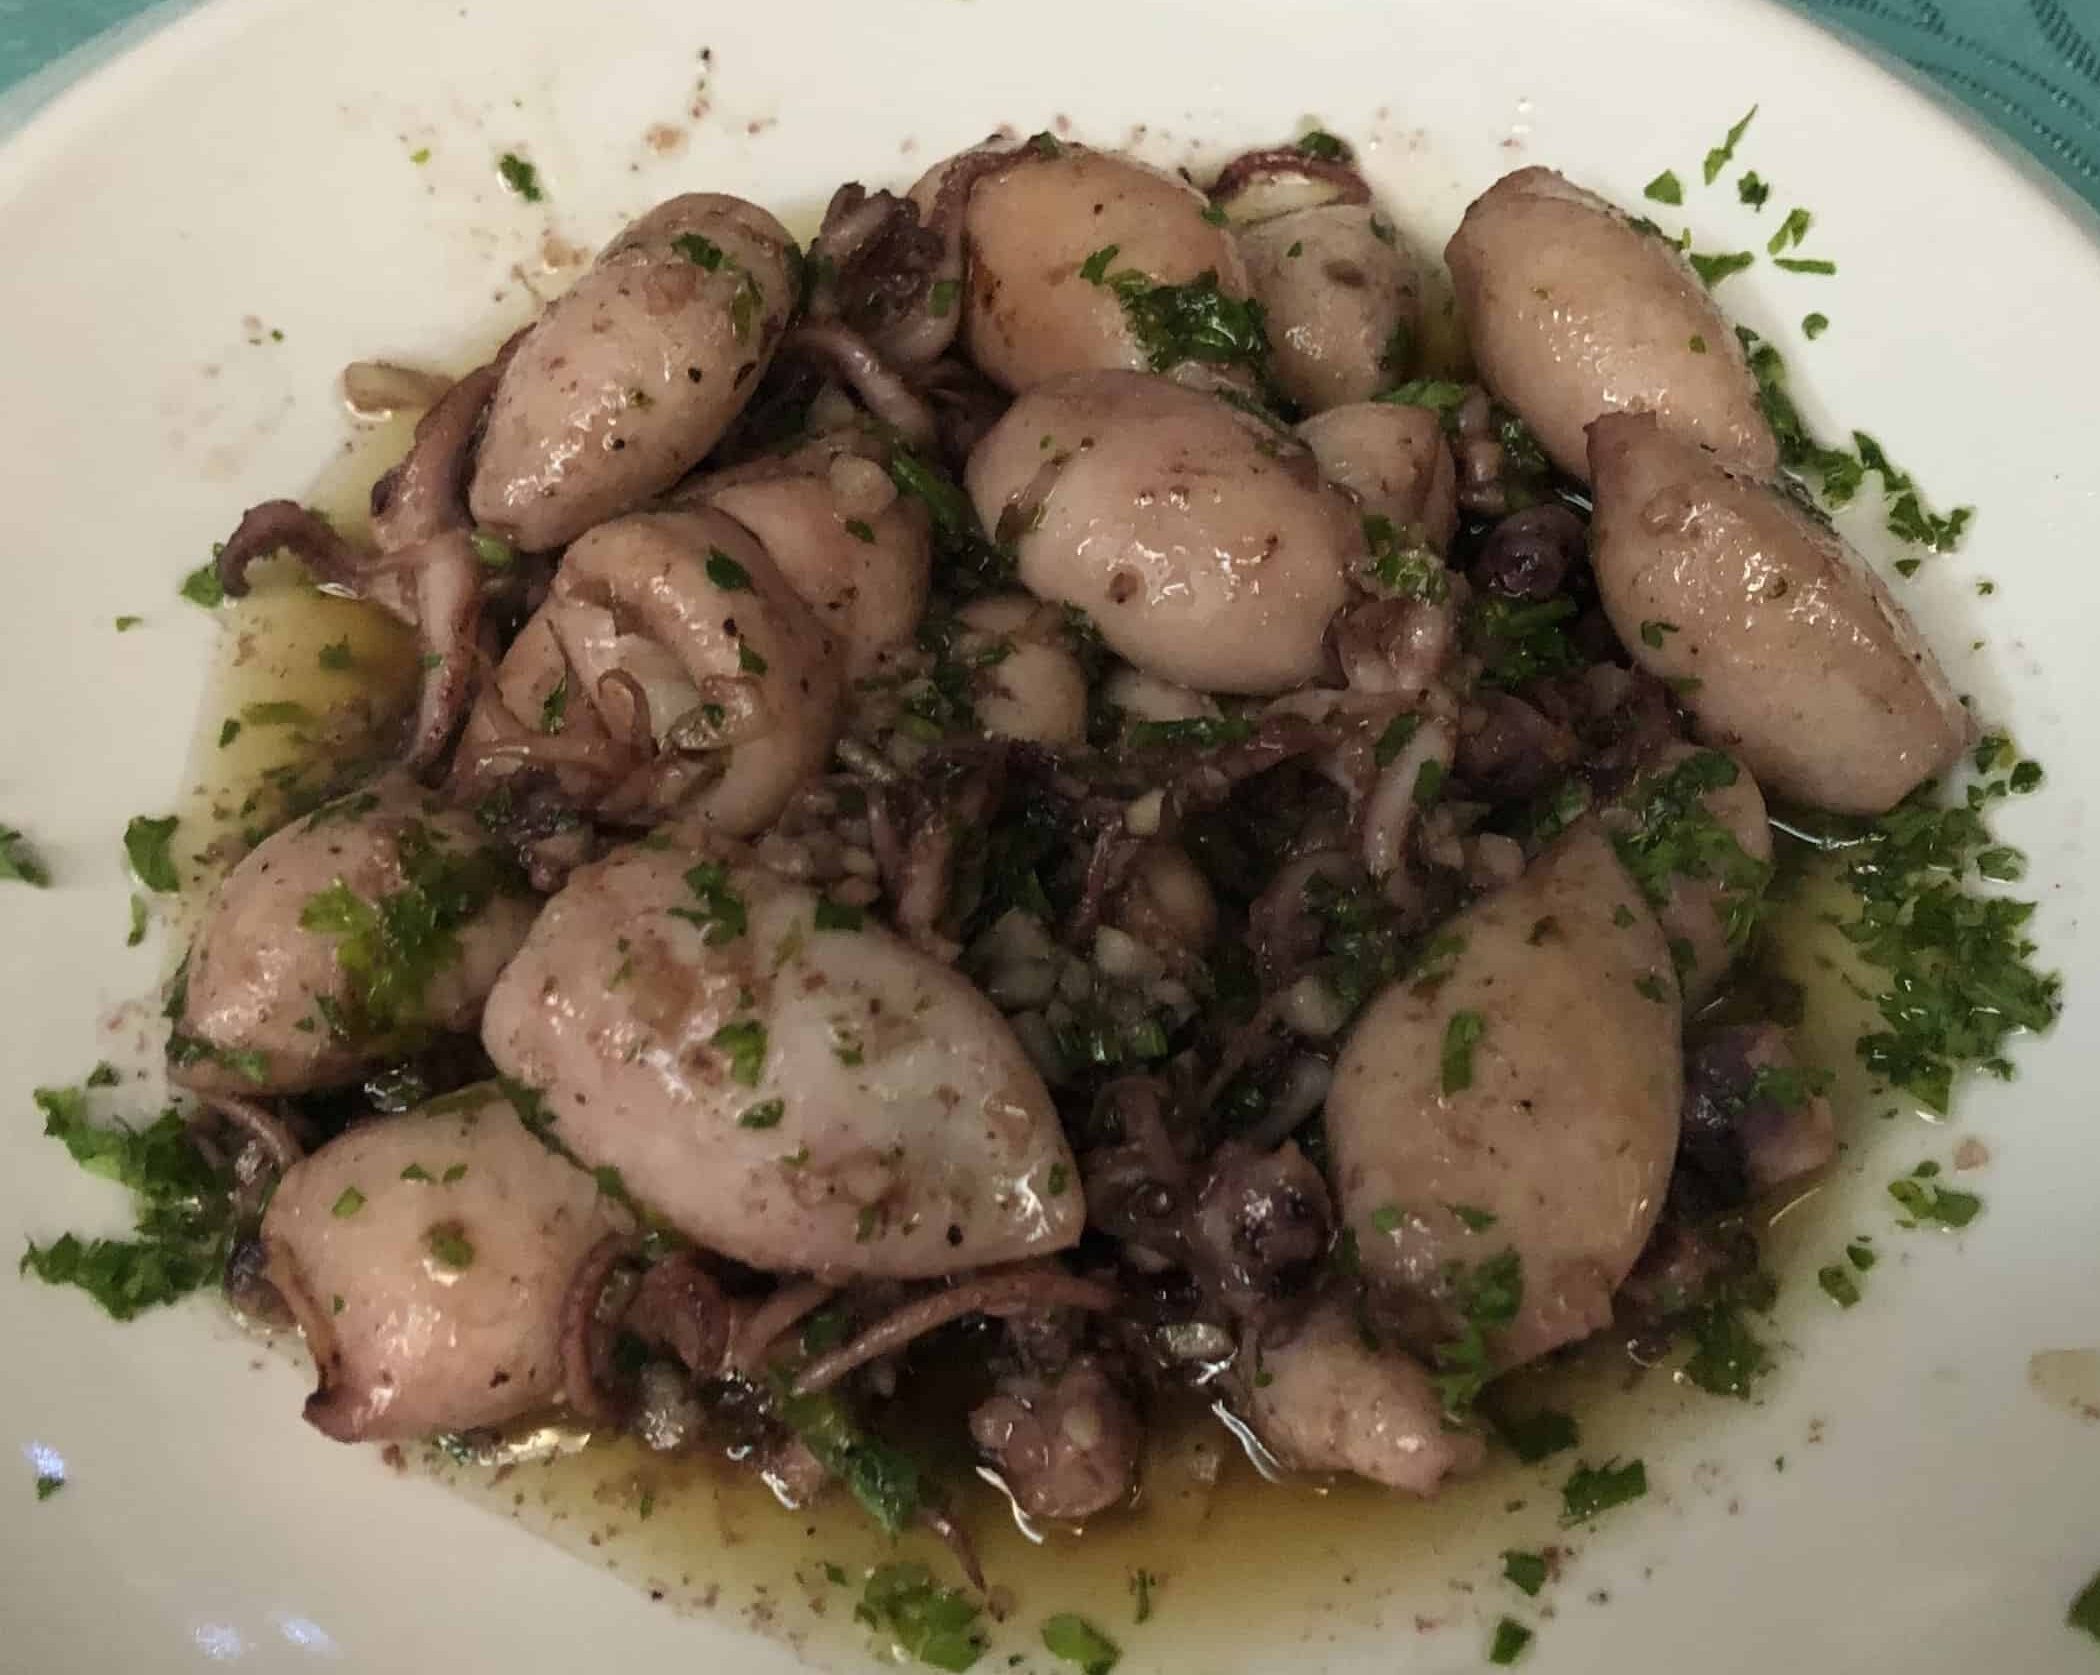 Grilled baby squid at Hispania